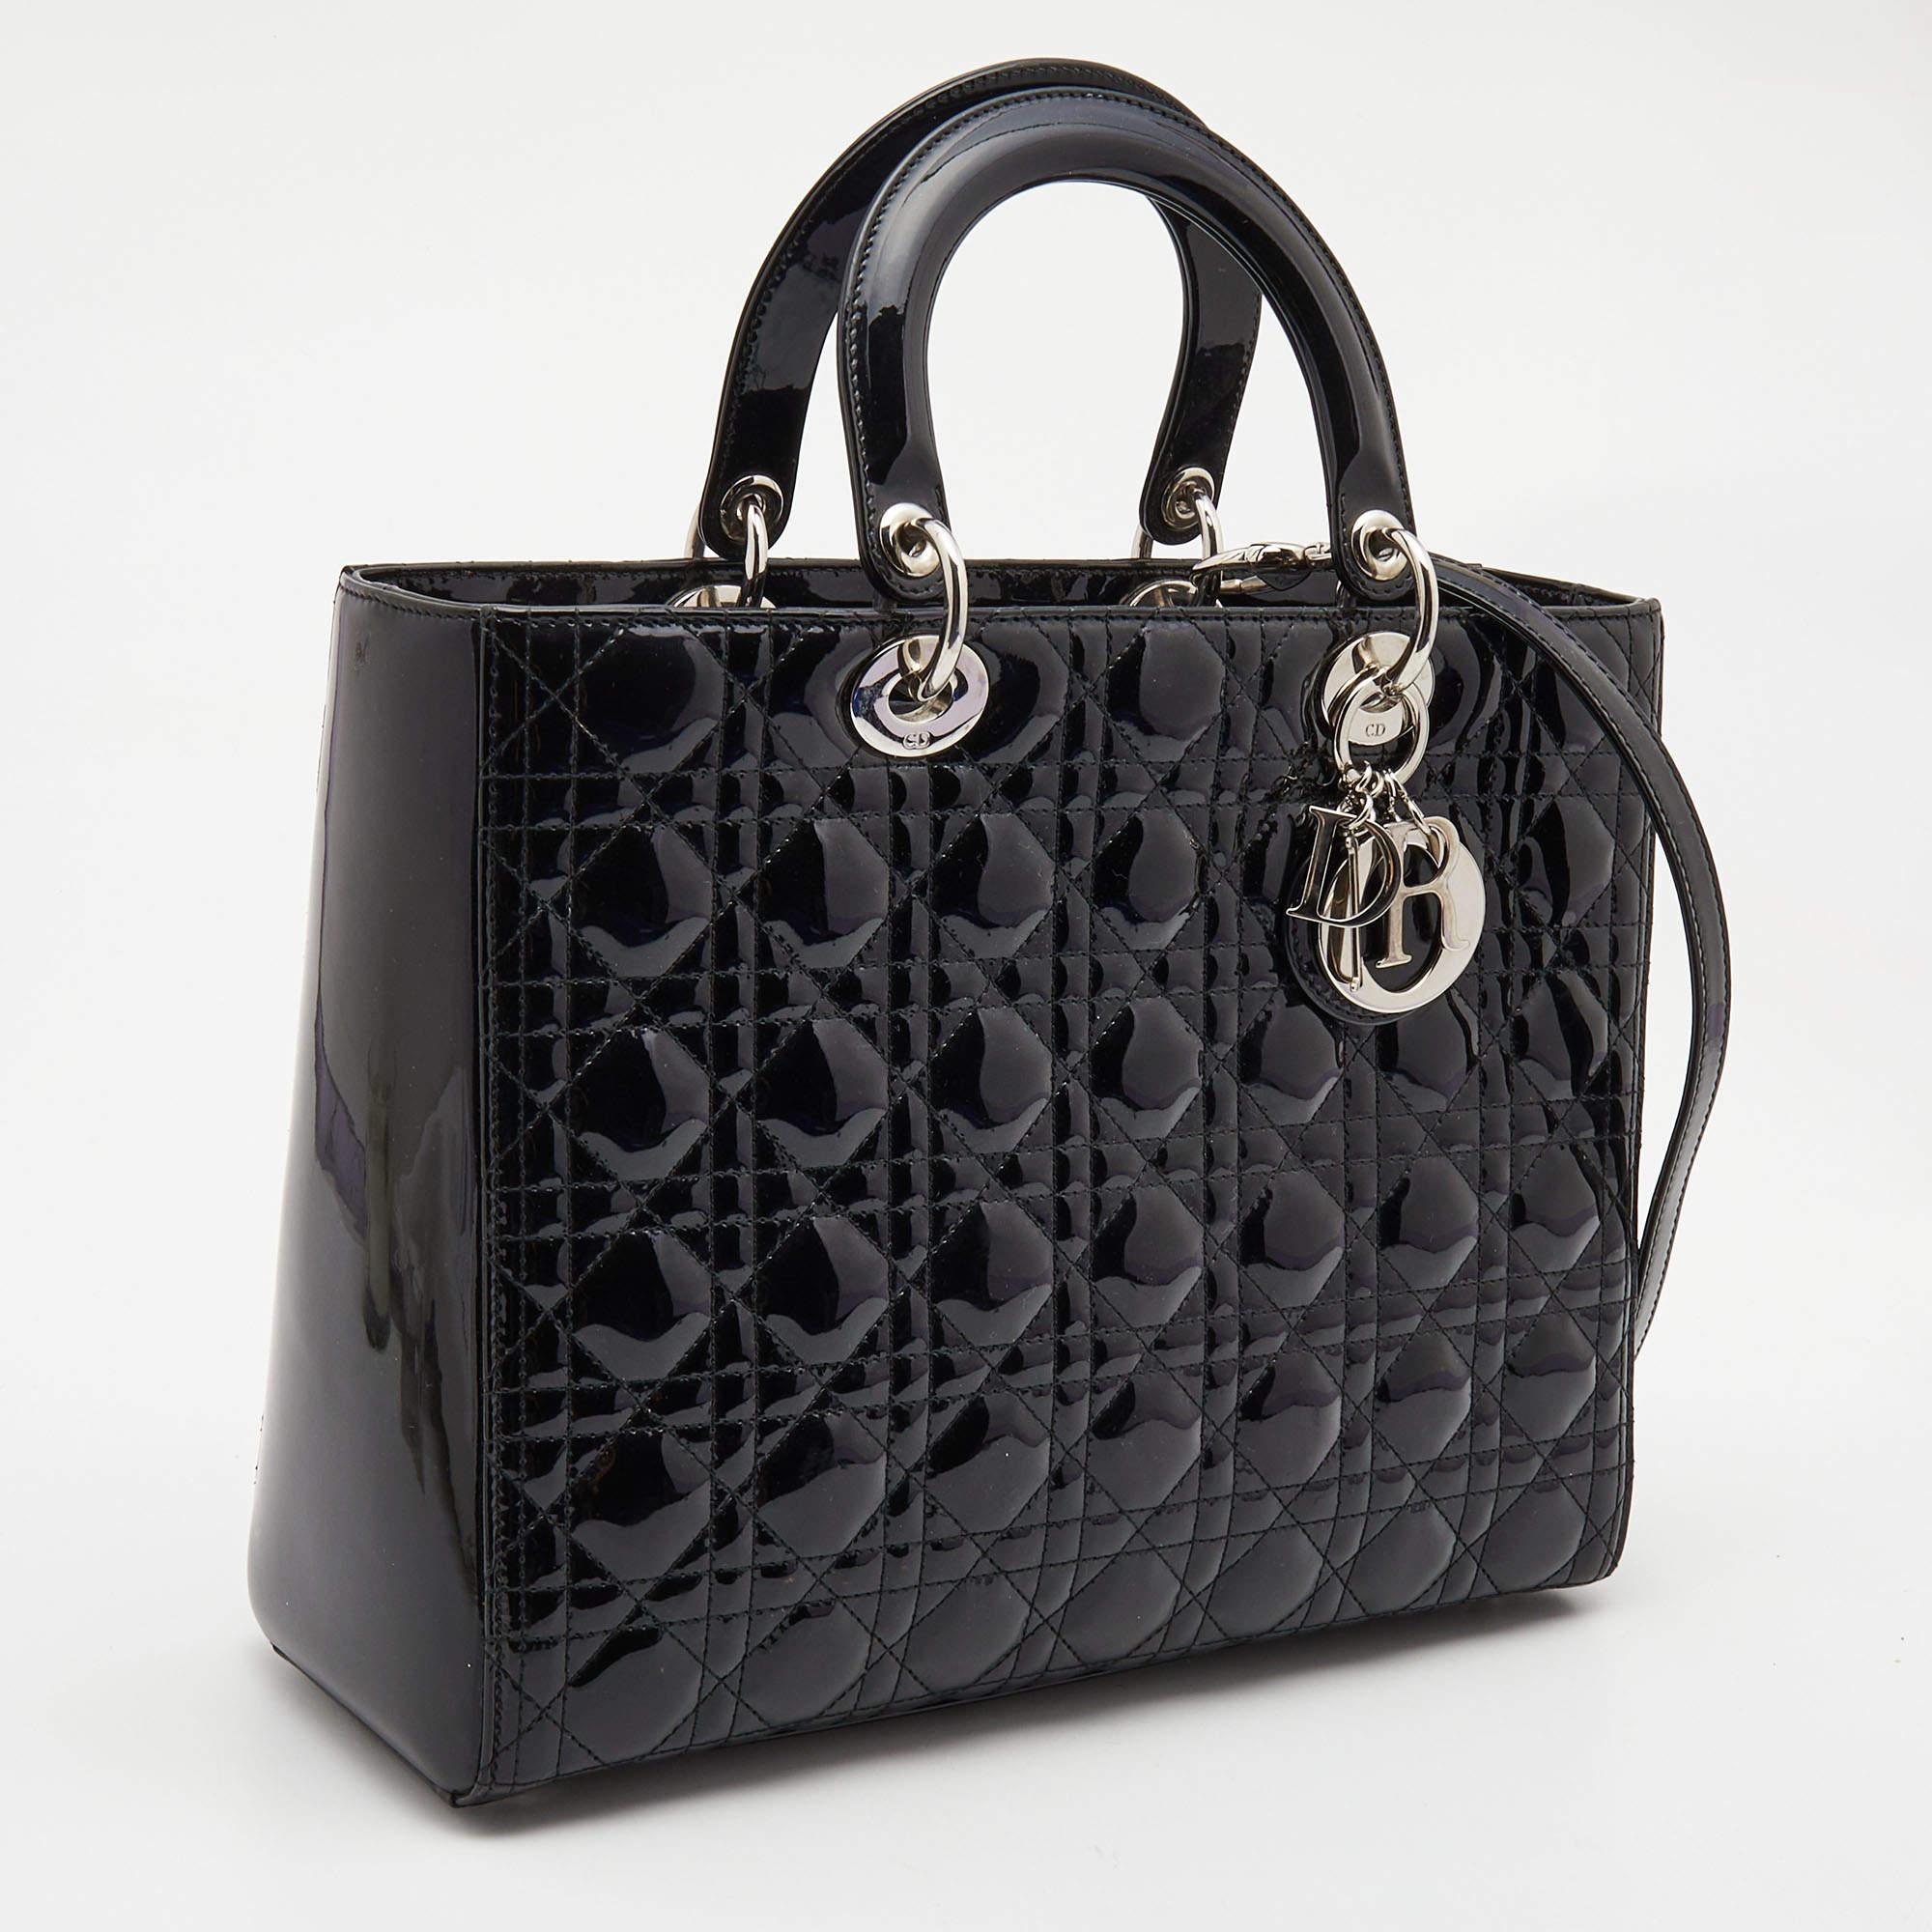 A timeless status and great design mark the Lady Dior tote. It is an iconic bag that people continue to invest in to this day. We have here this classic beauty crafted from black Cannage patent leather. The bag has a lined interior for your